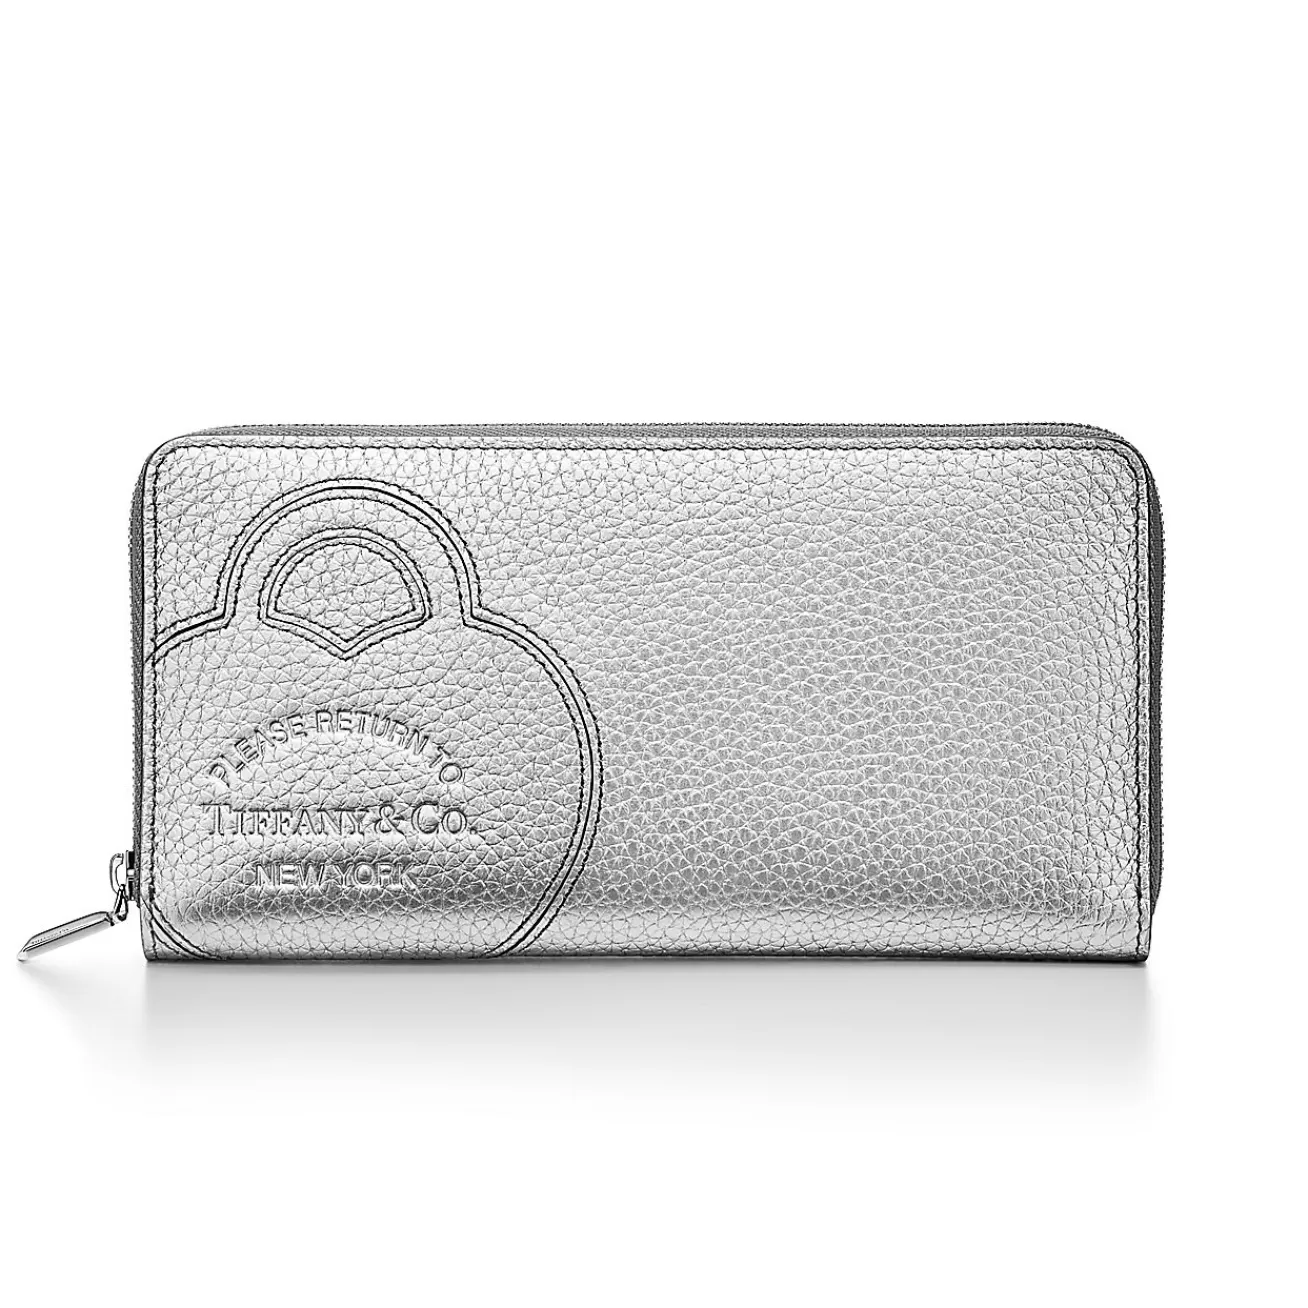 Tiffany & Co. Return to Tiffany® Large Zip Wallet in Silver-colored Leather | ^Women Small Leather Goods | Women's Accessories